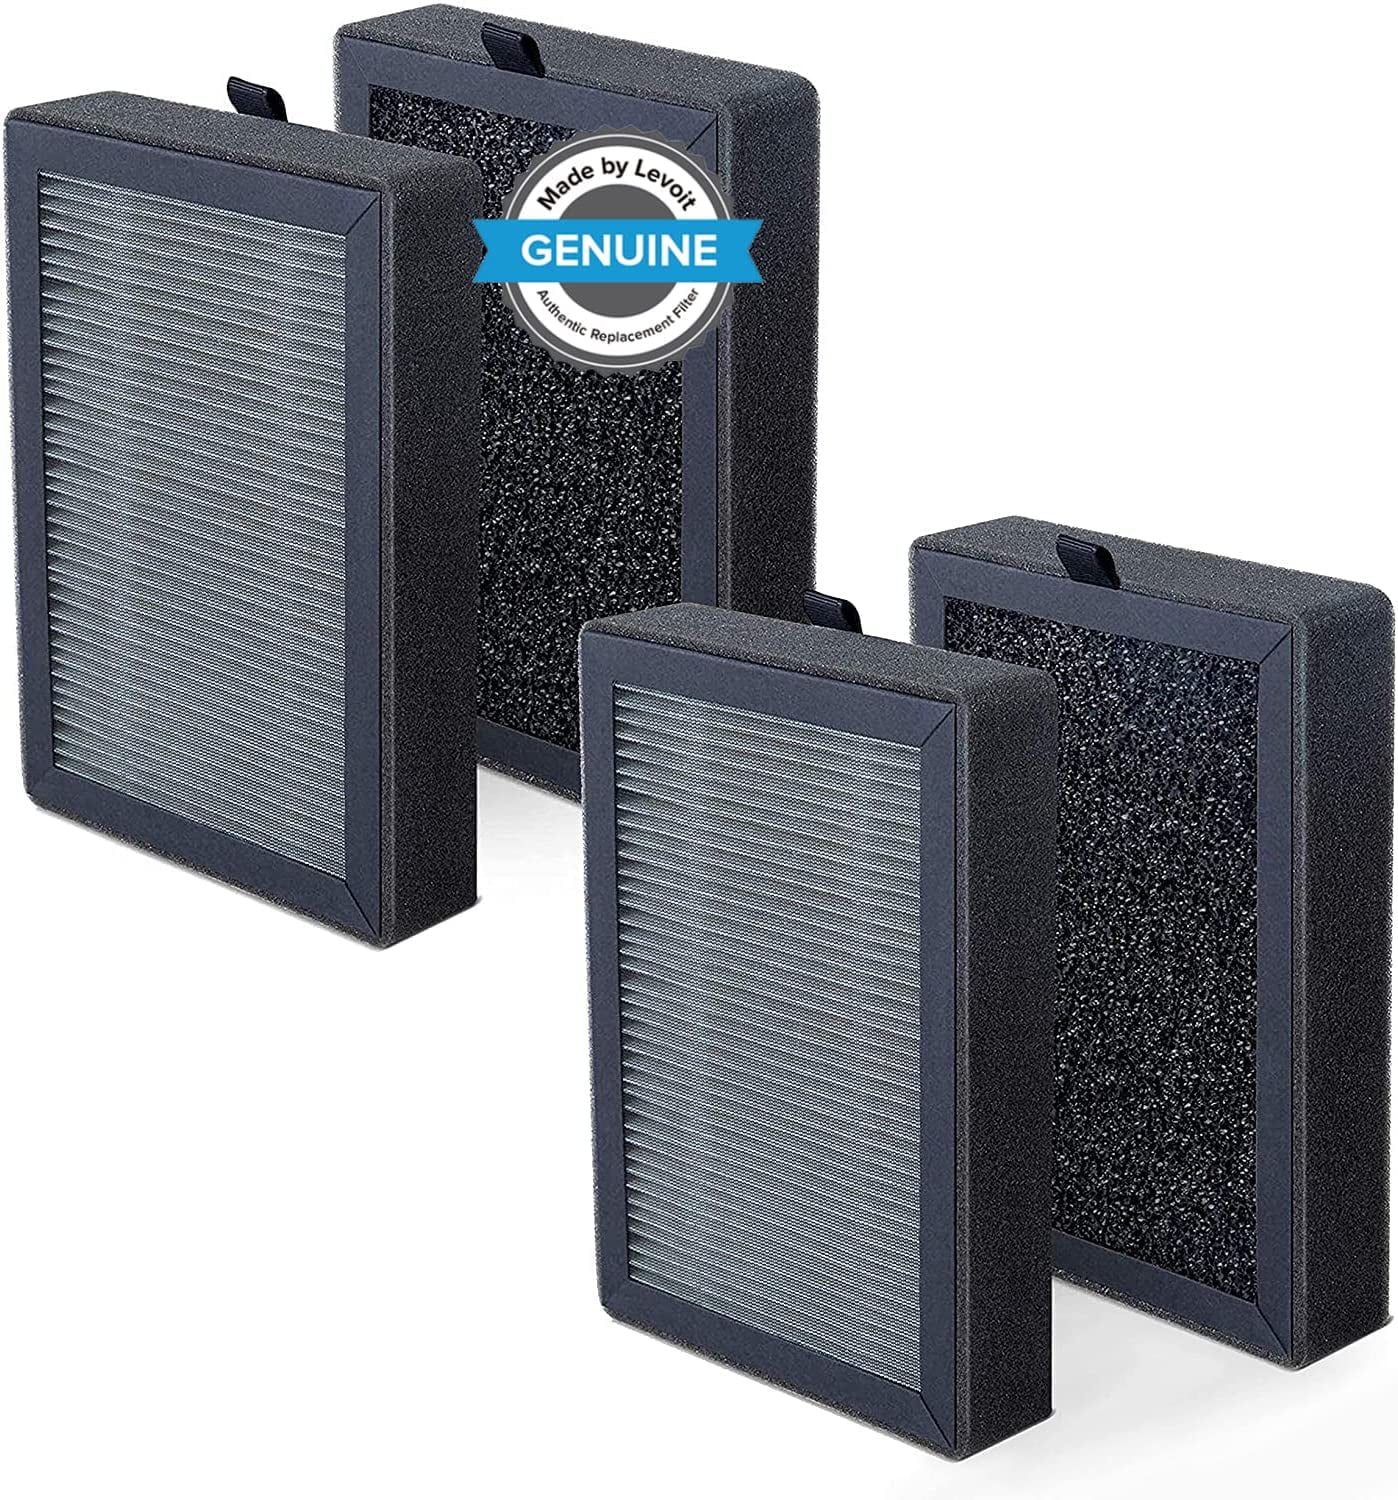 Nispira True HEPA Filter Compatible with Levoit Air Purifier LV-H128-R